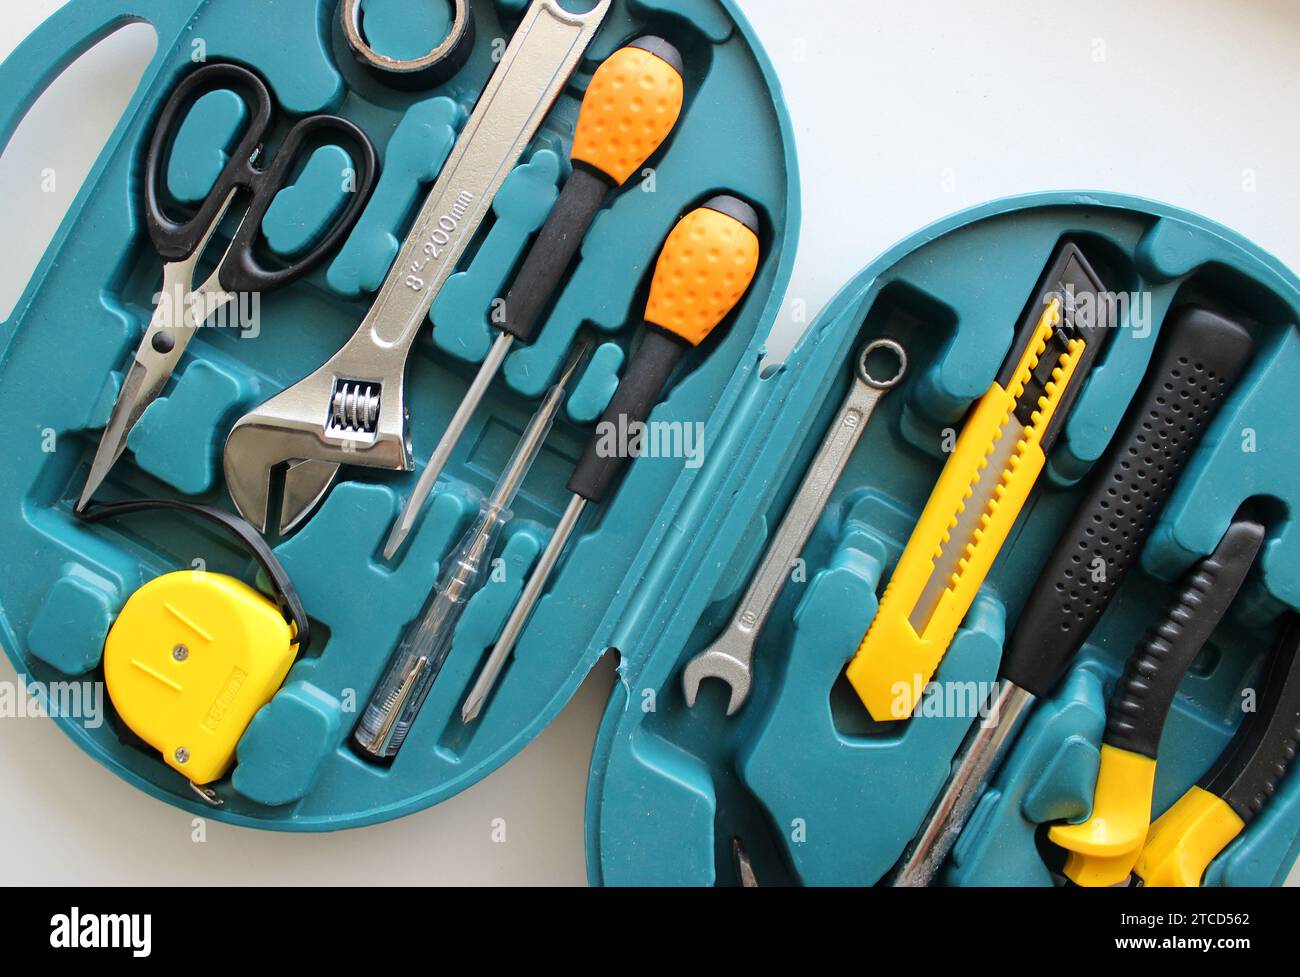 Opened oval case with tools and equipment for electrician closeup stock photo Stock Photo